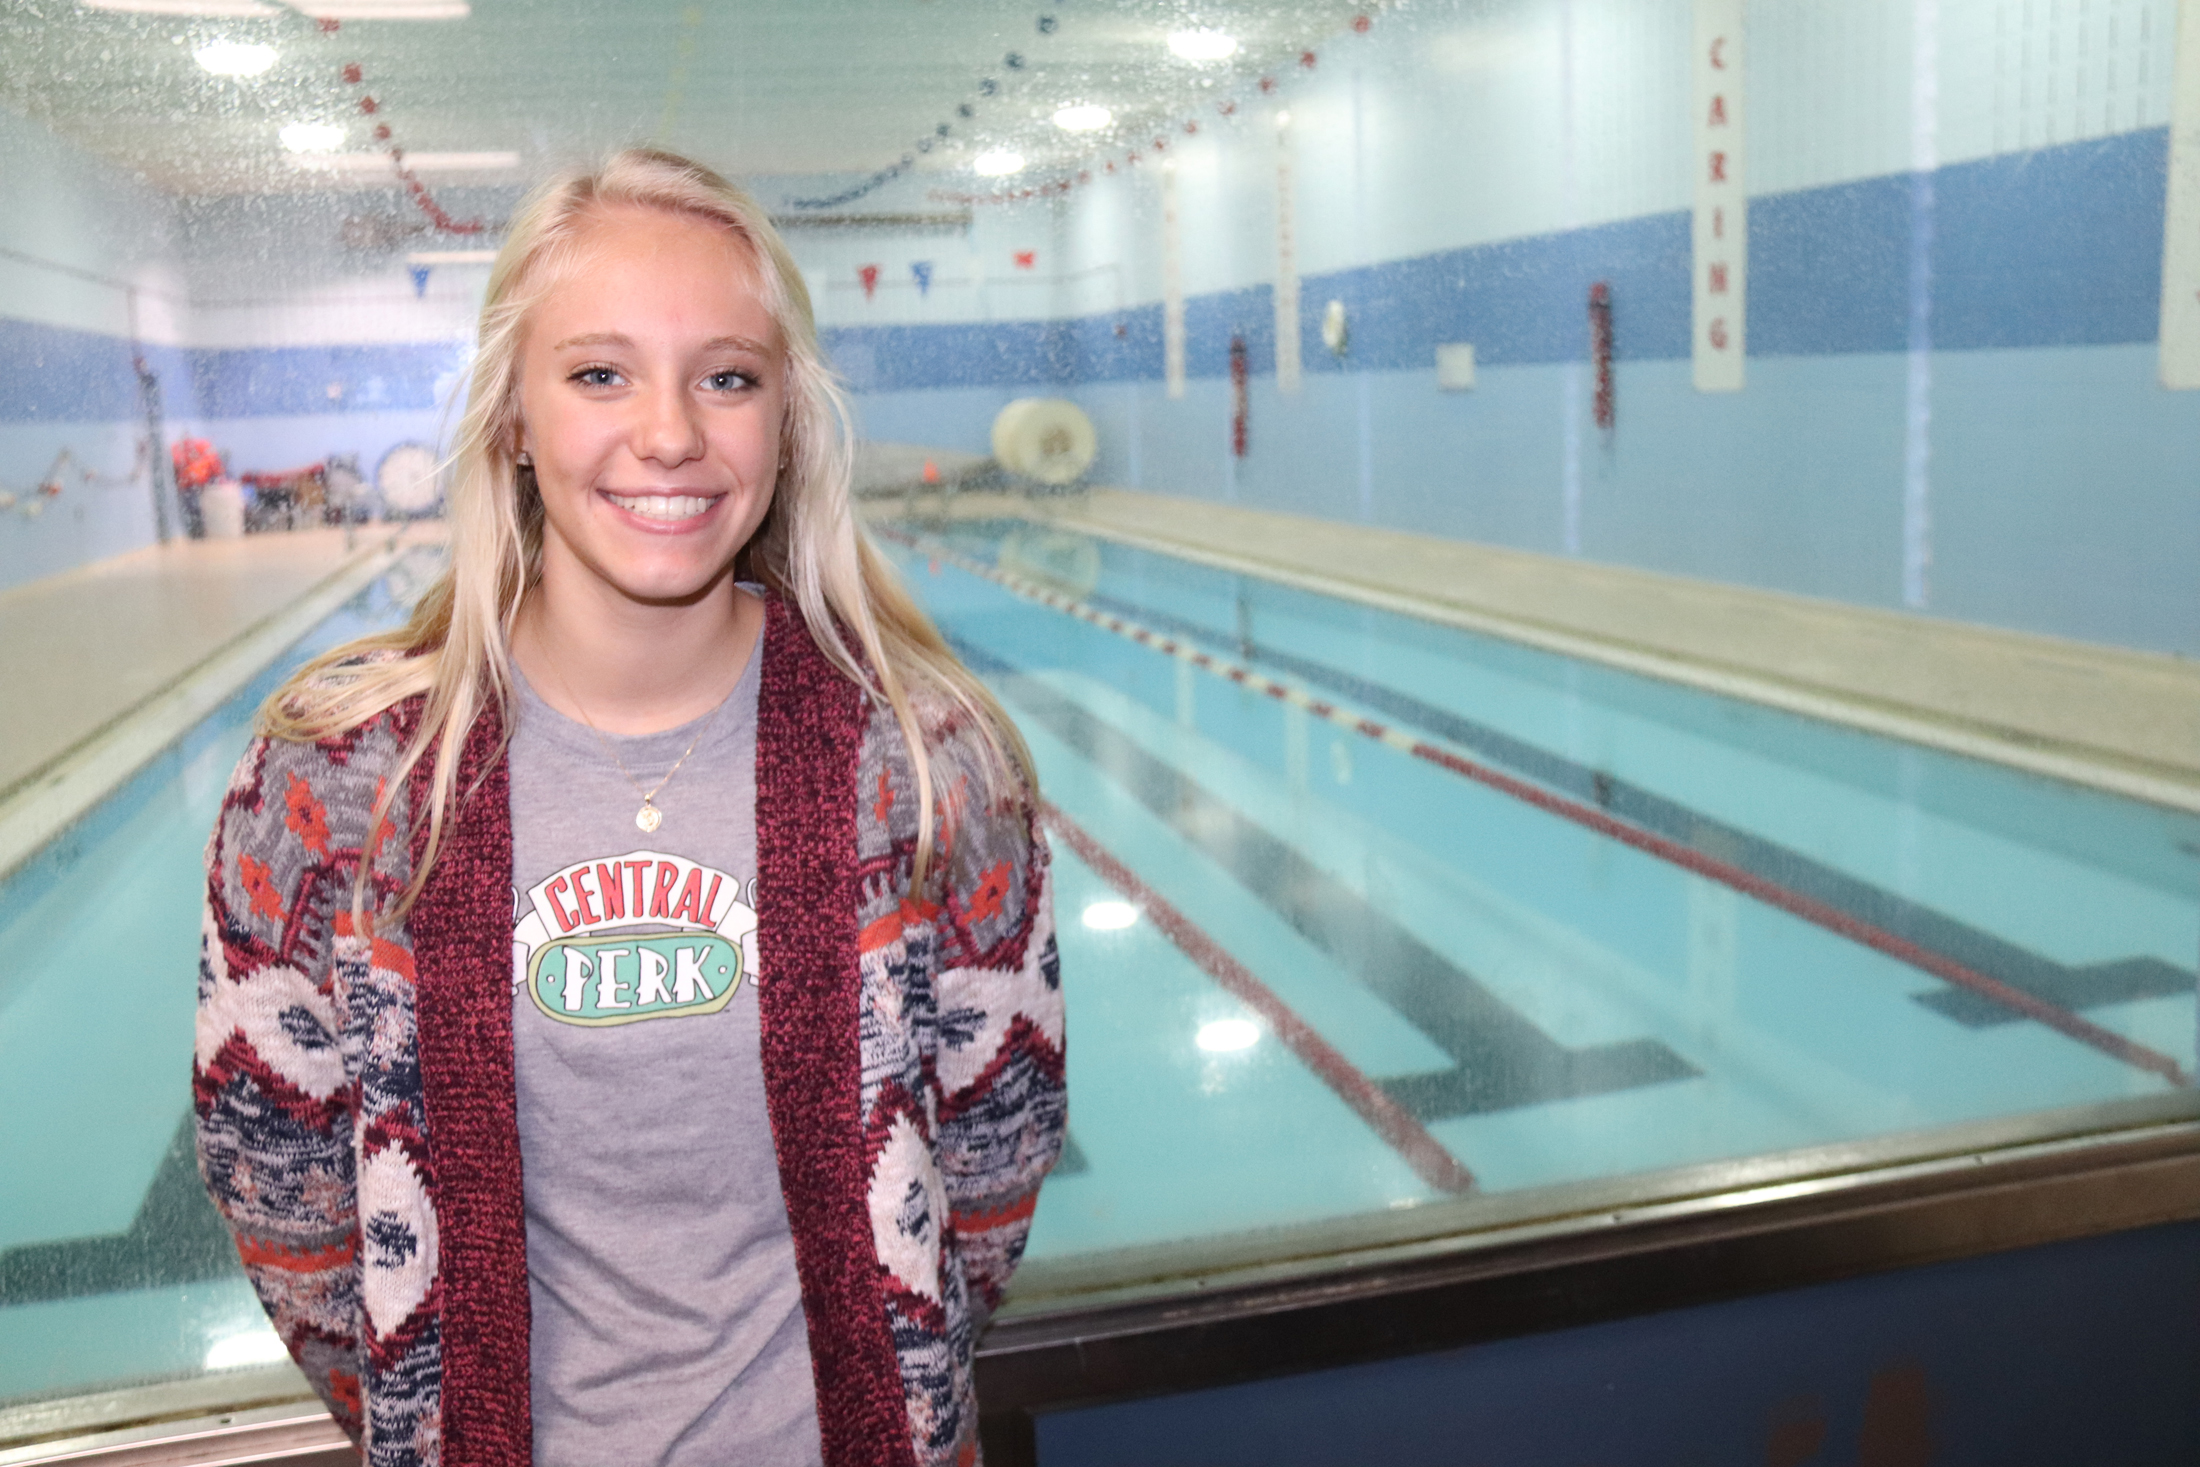 Charles City’s Nia Litterer qualifies in 4 state meet events while swimming for Mason City